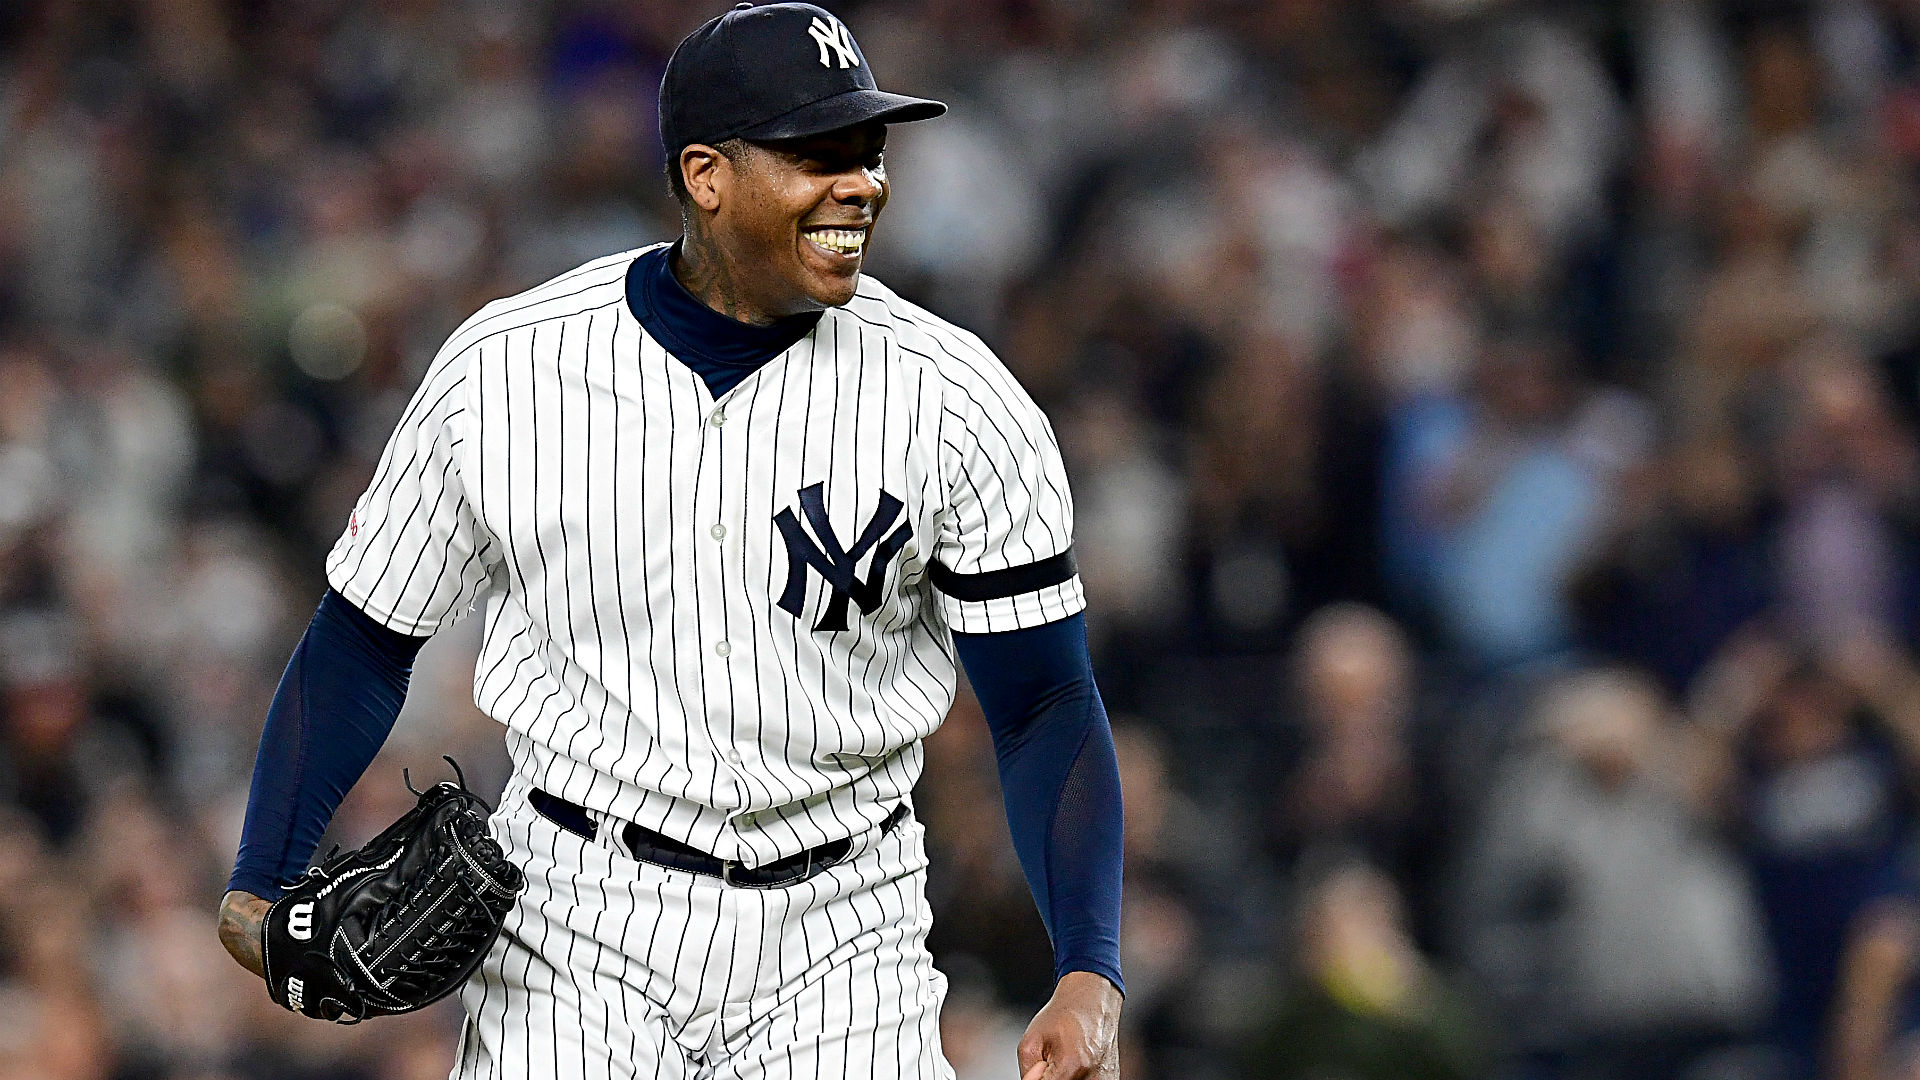 Aroldis Chapman's resurgence couldn't come at a better time, Bronx  Pinstripes